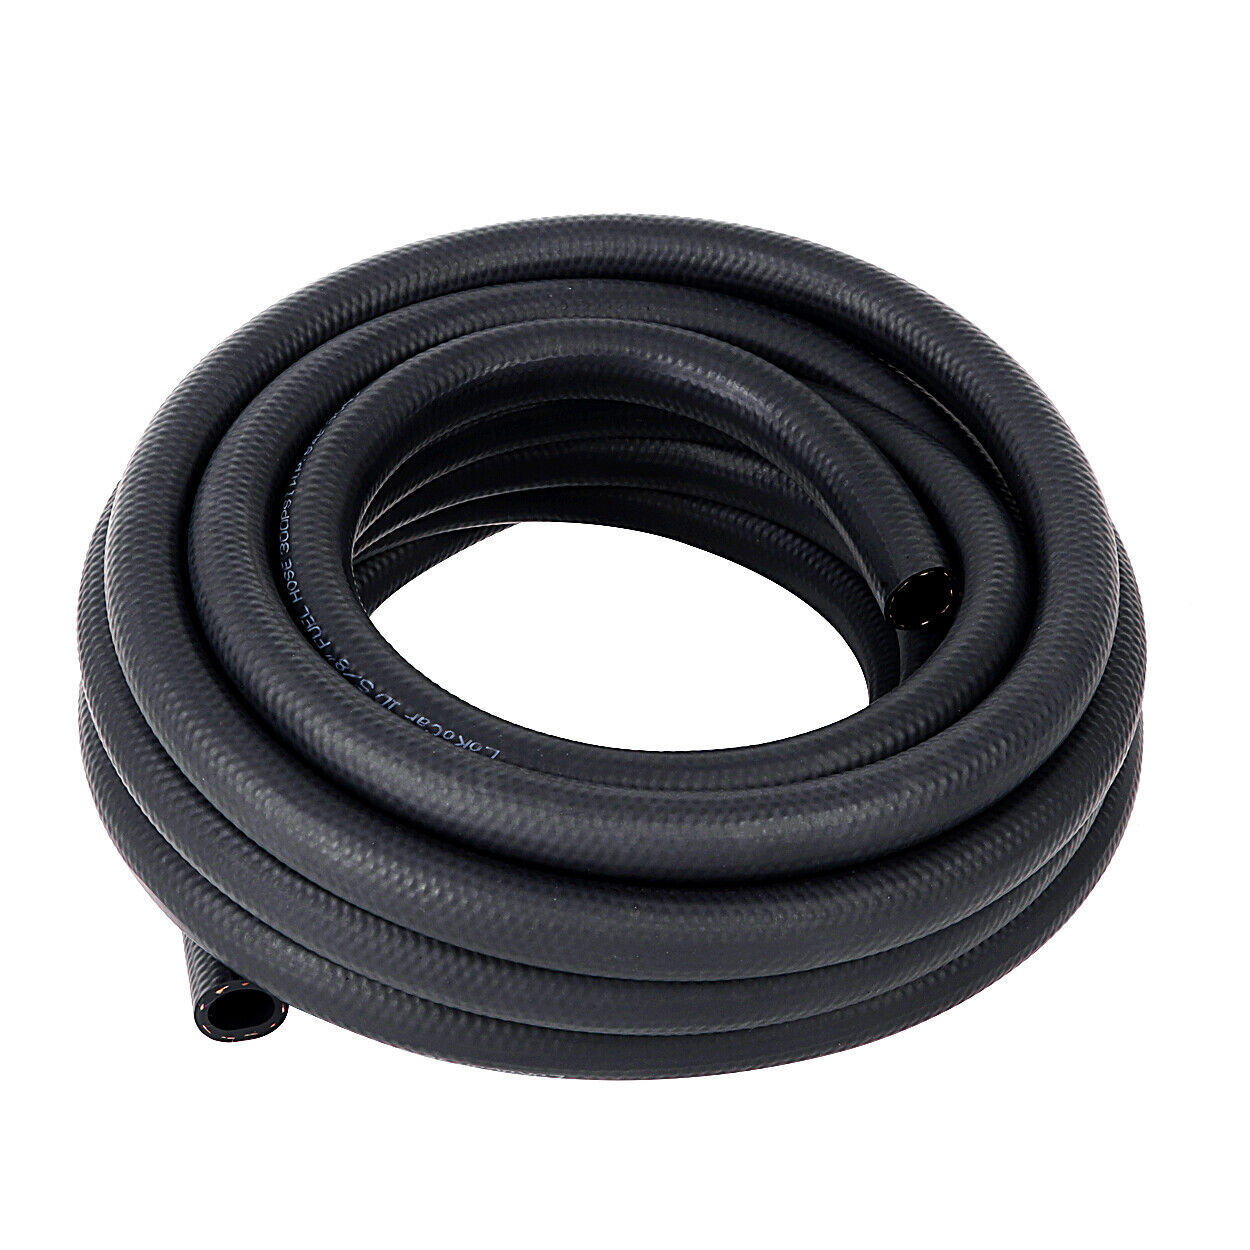 10ft 6AN Braided Fuel Line Hose 3/8'' Push-on Fuel Line, Pressure